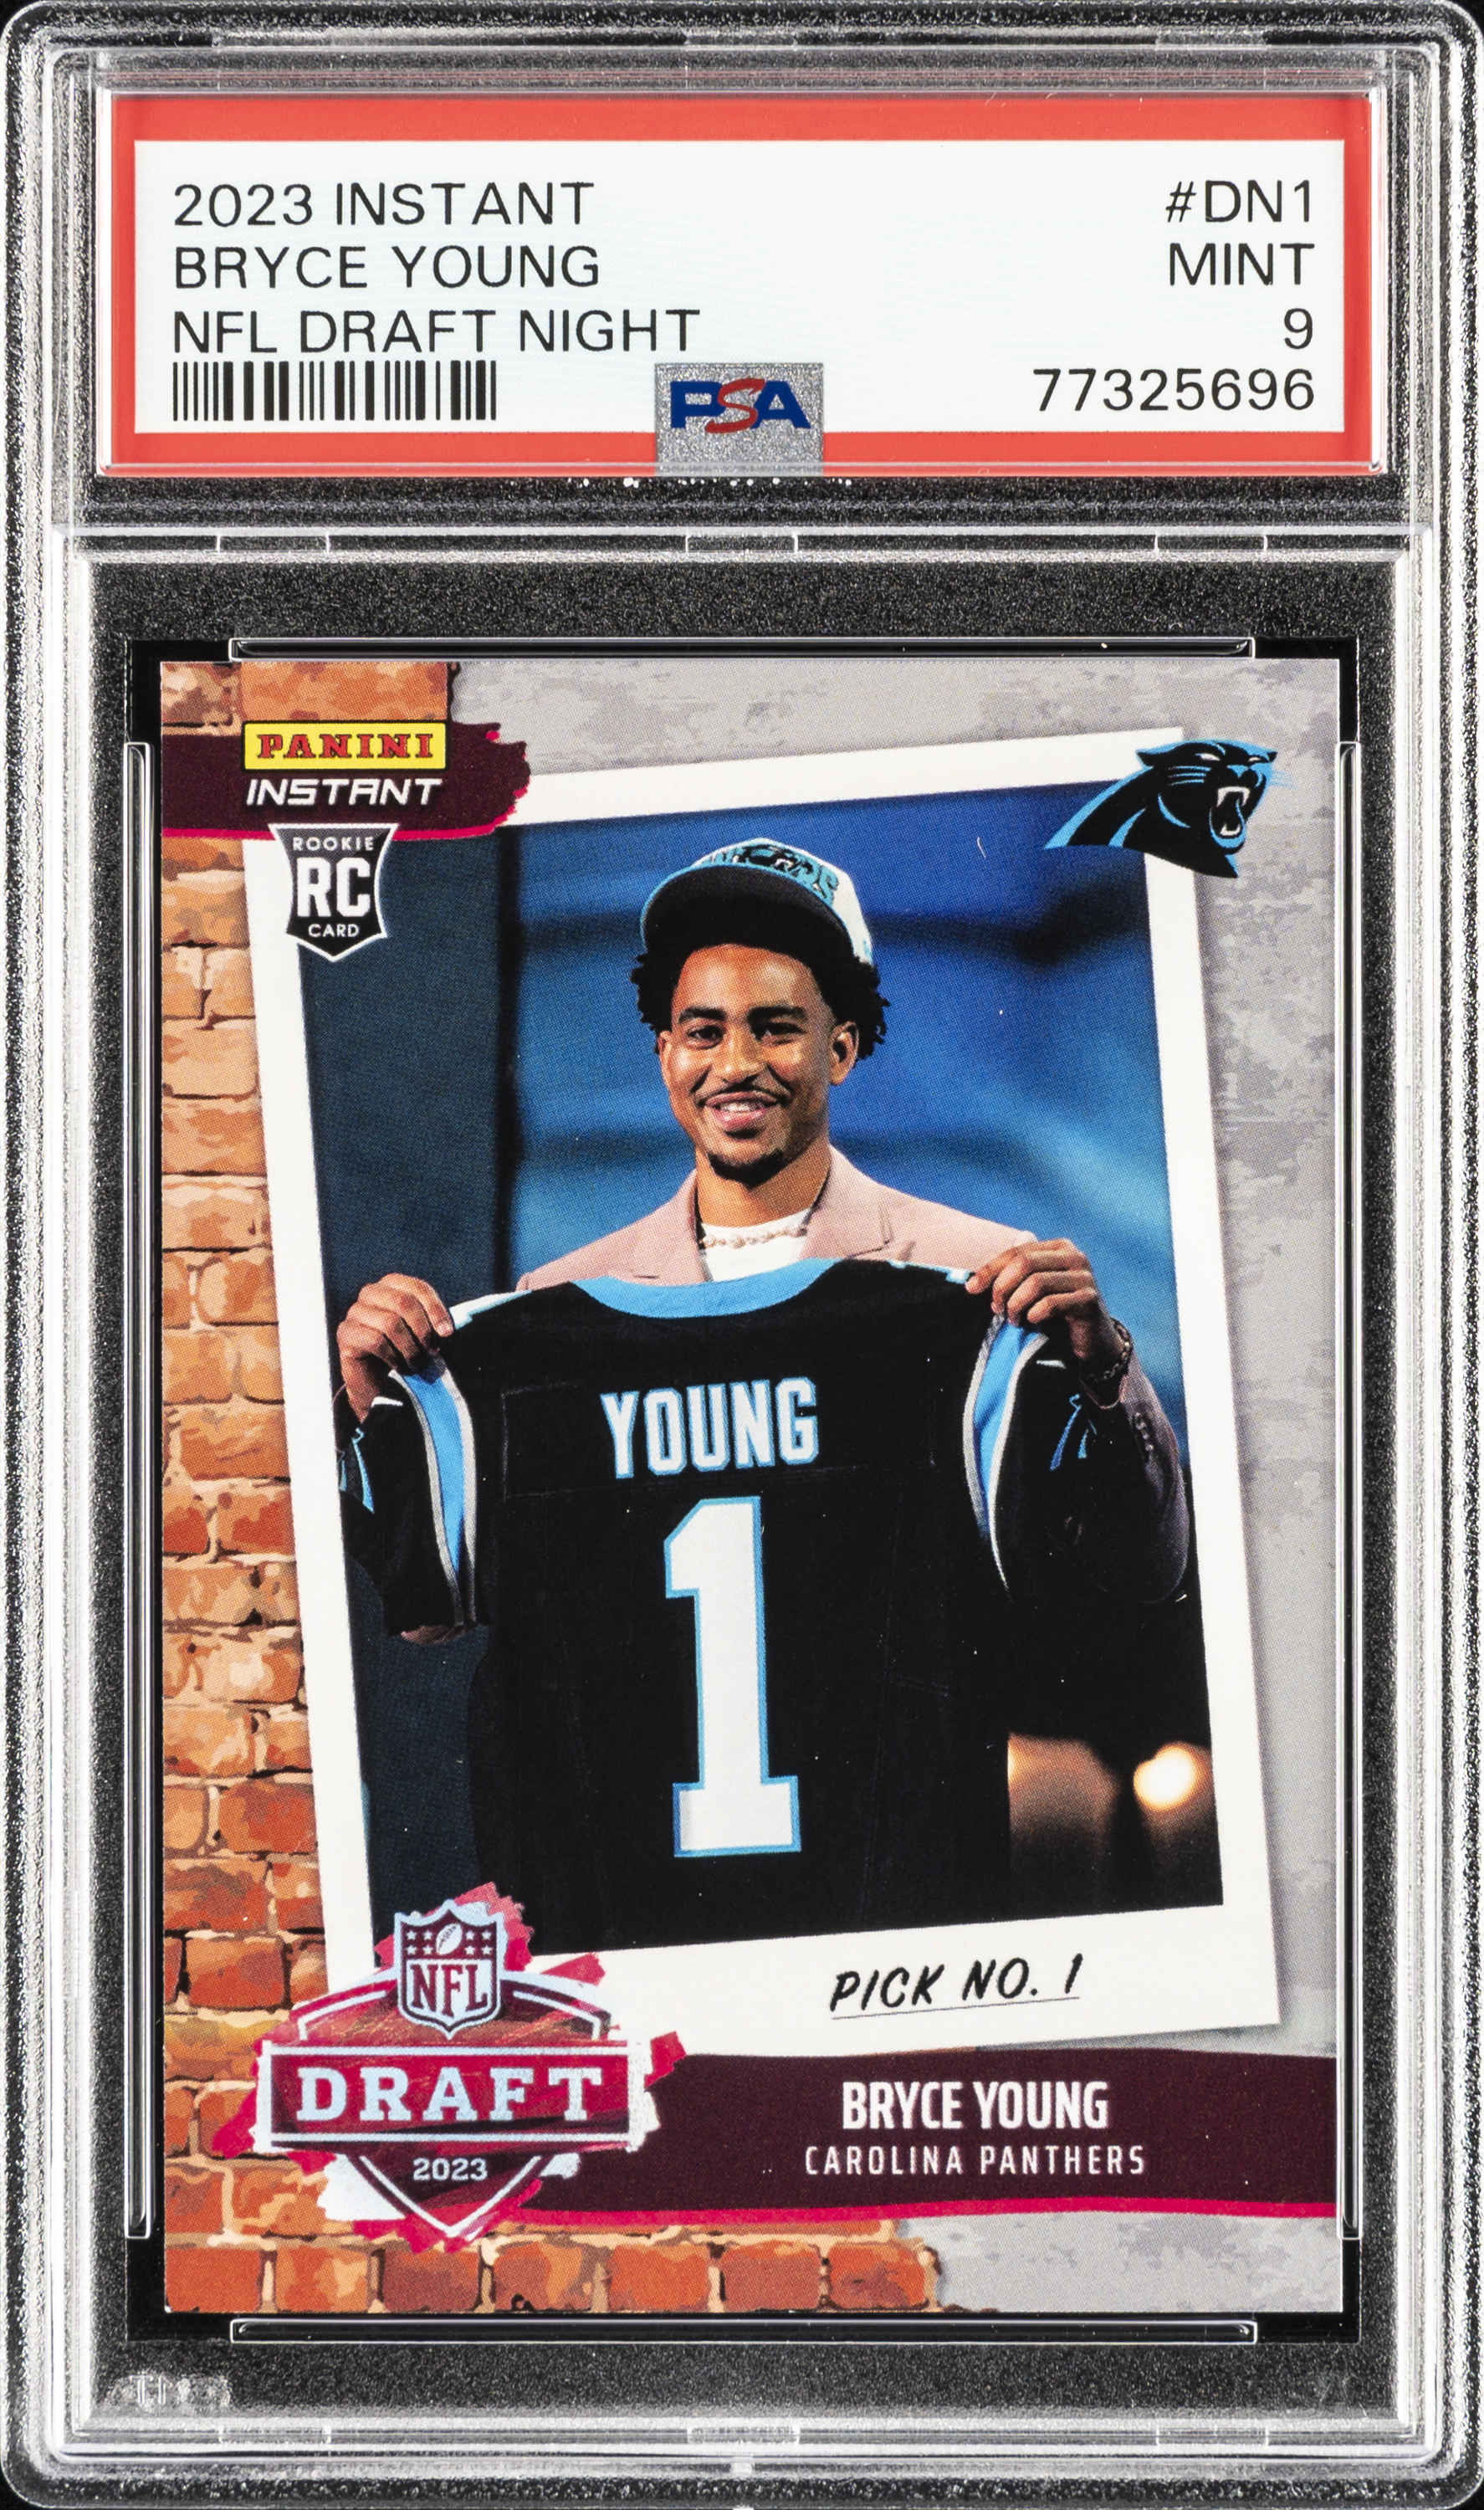 2023 Panini Instant NFL Draft Night Dn1 Bryce Young PSA 9